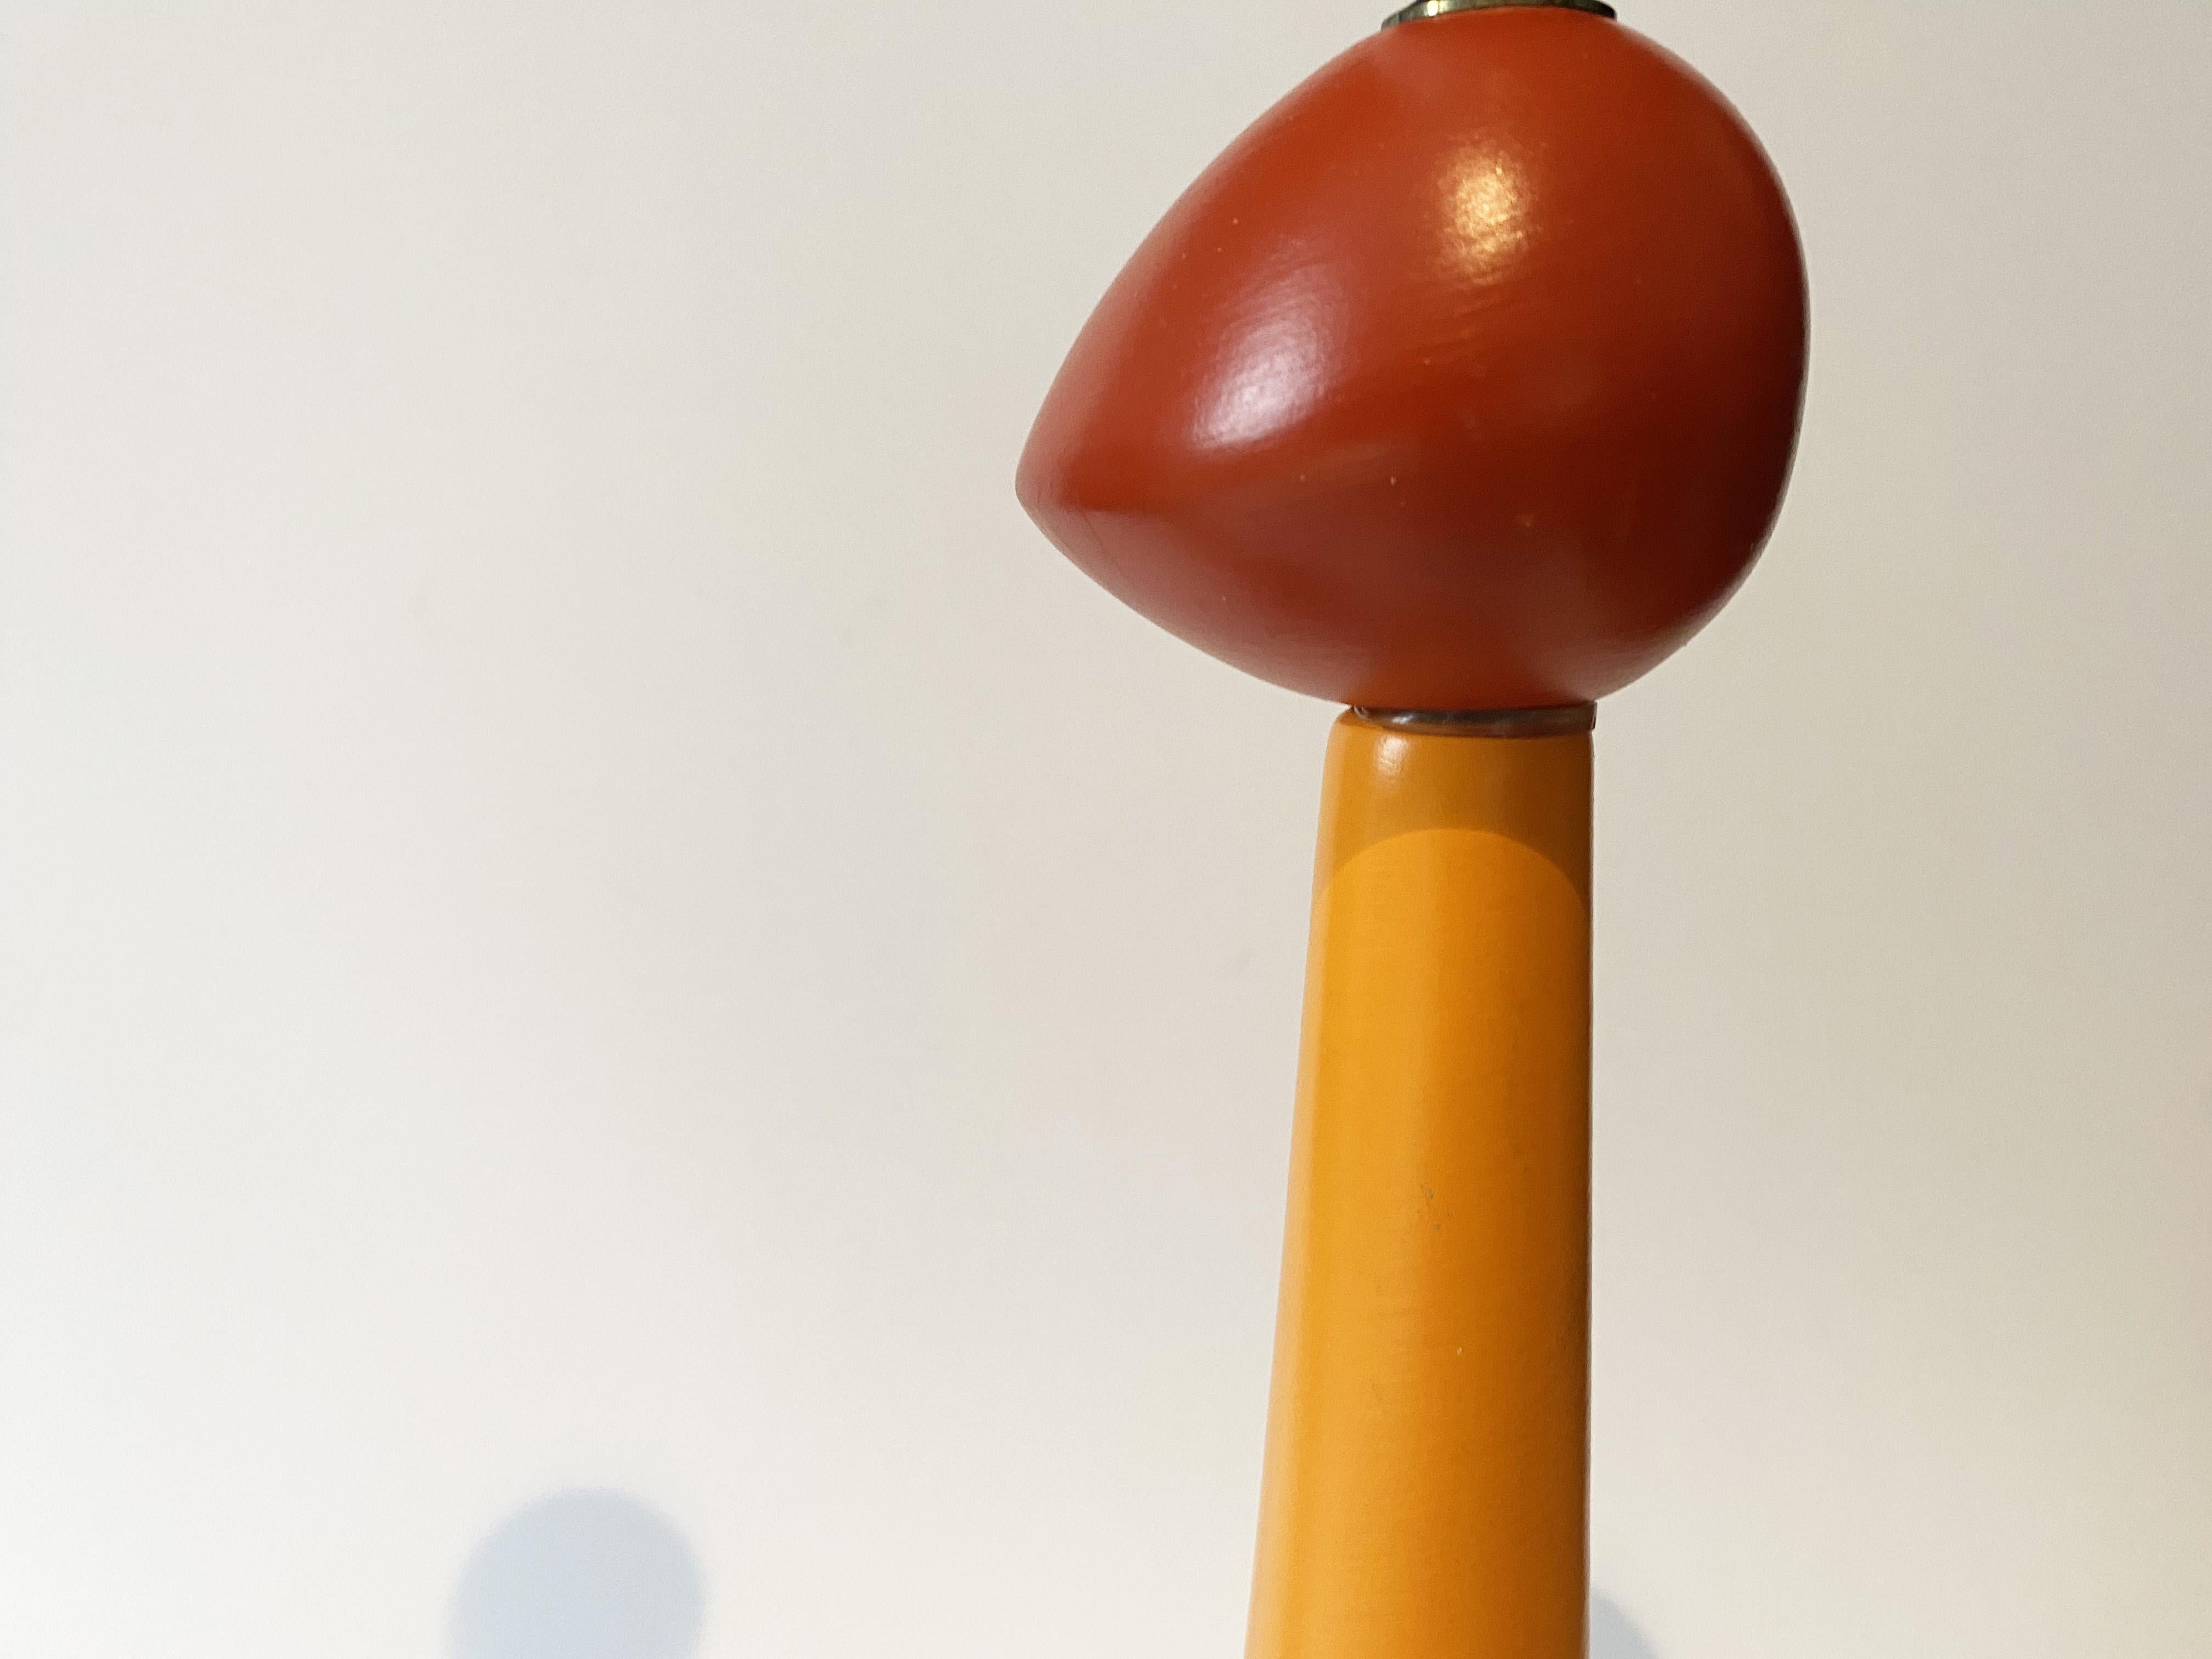 French Postmodern Lamps in Ceramic, style of Memphis Milano or Olivier Villatte, 1980s.